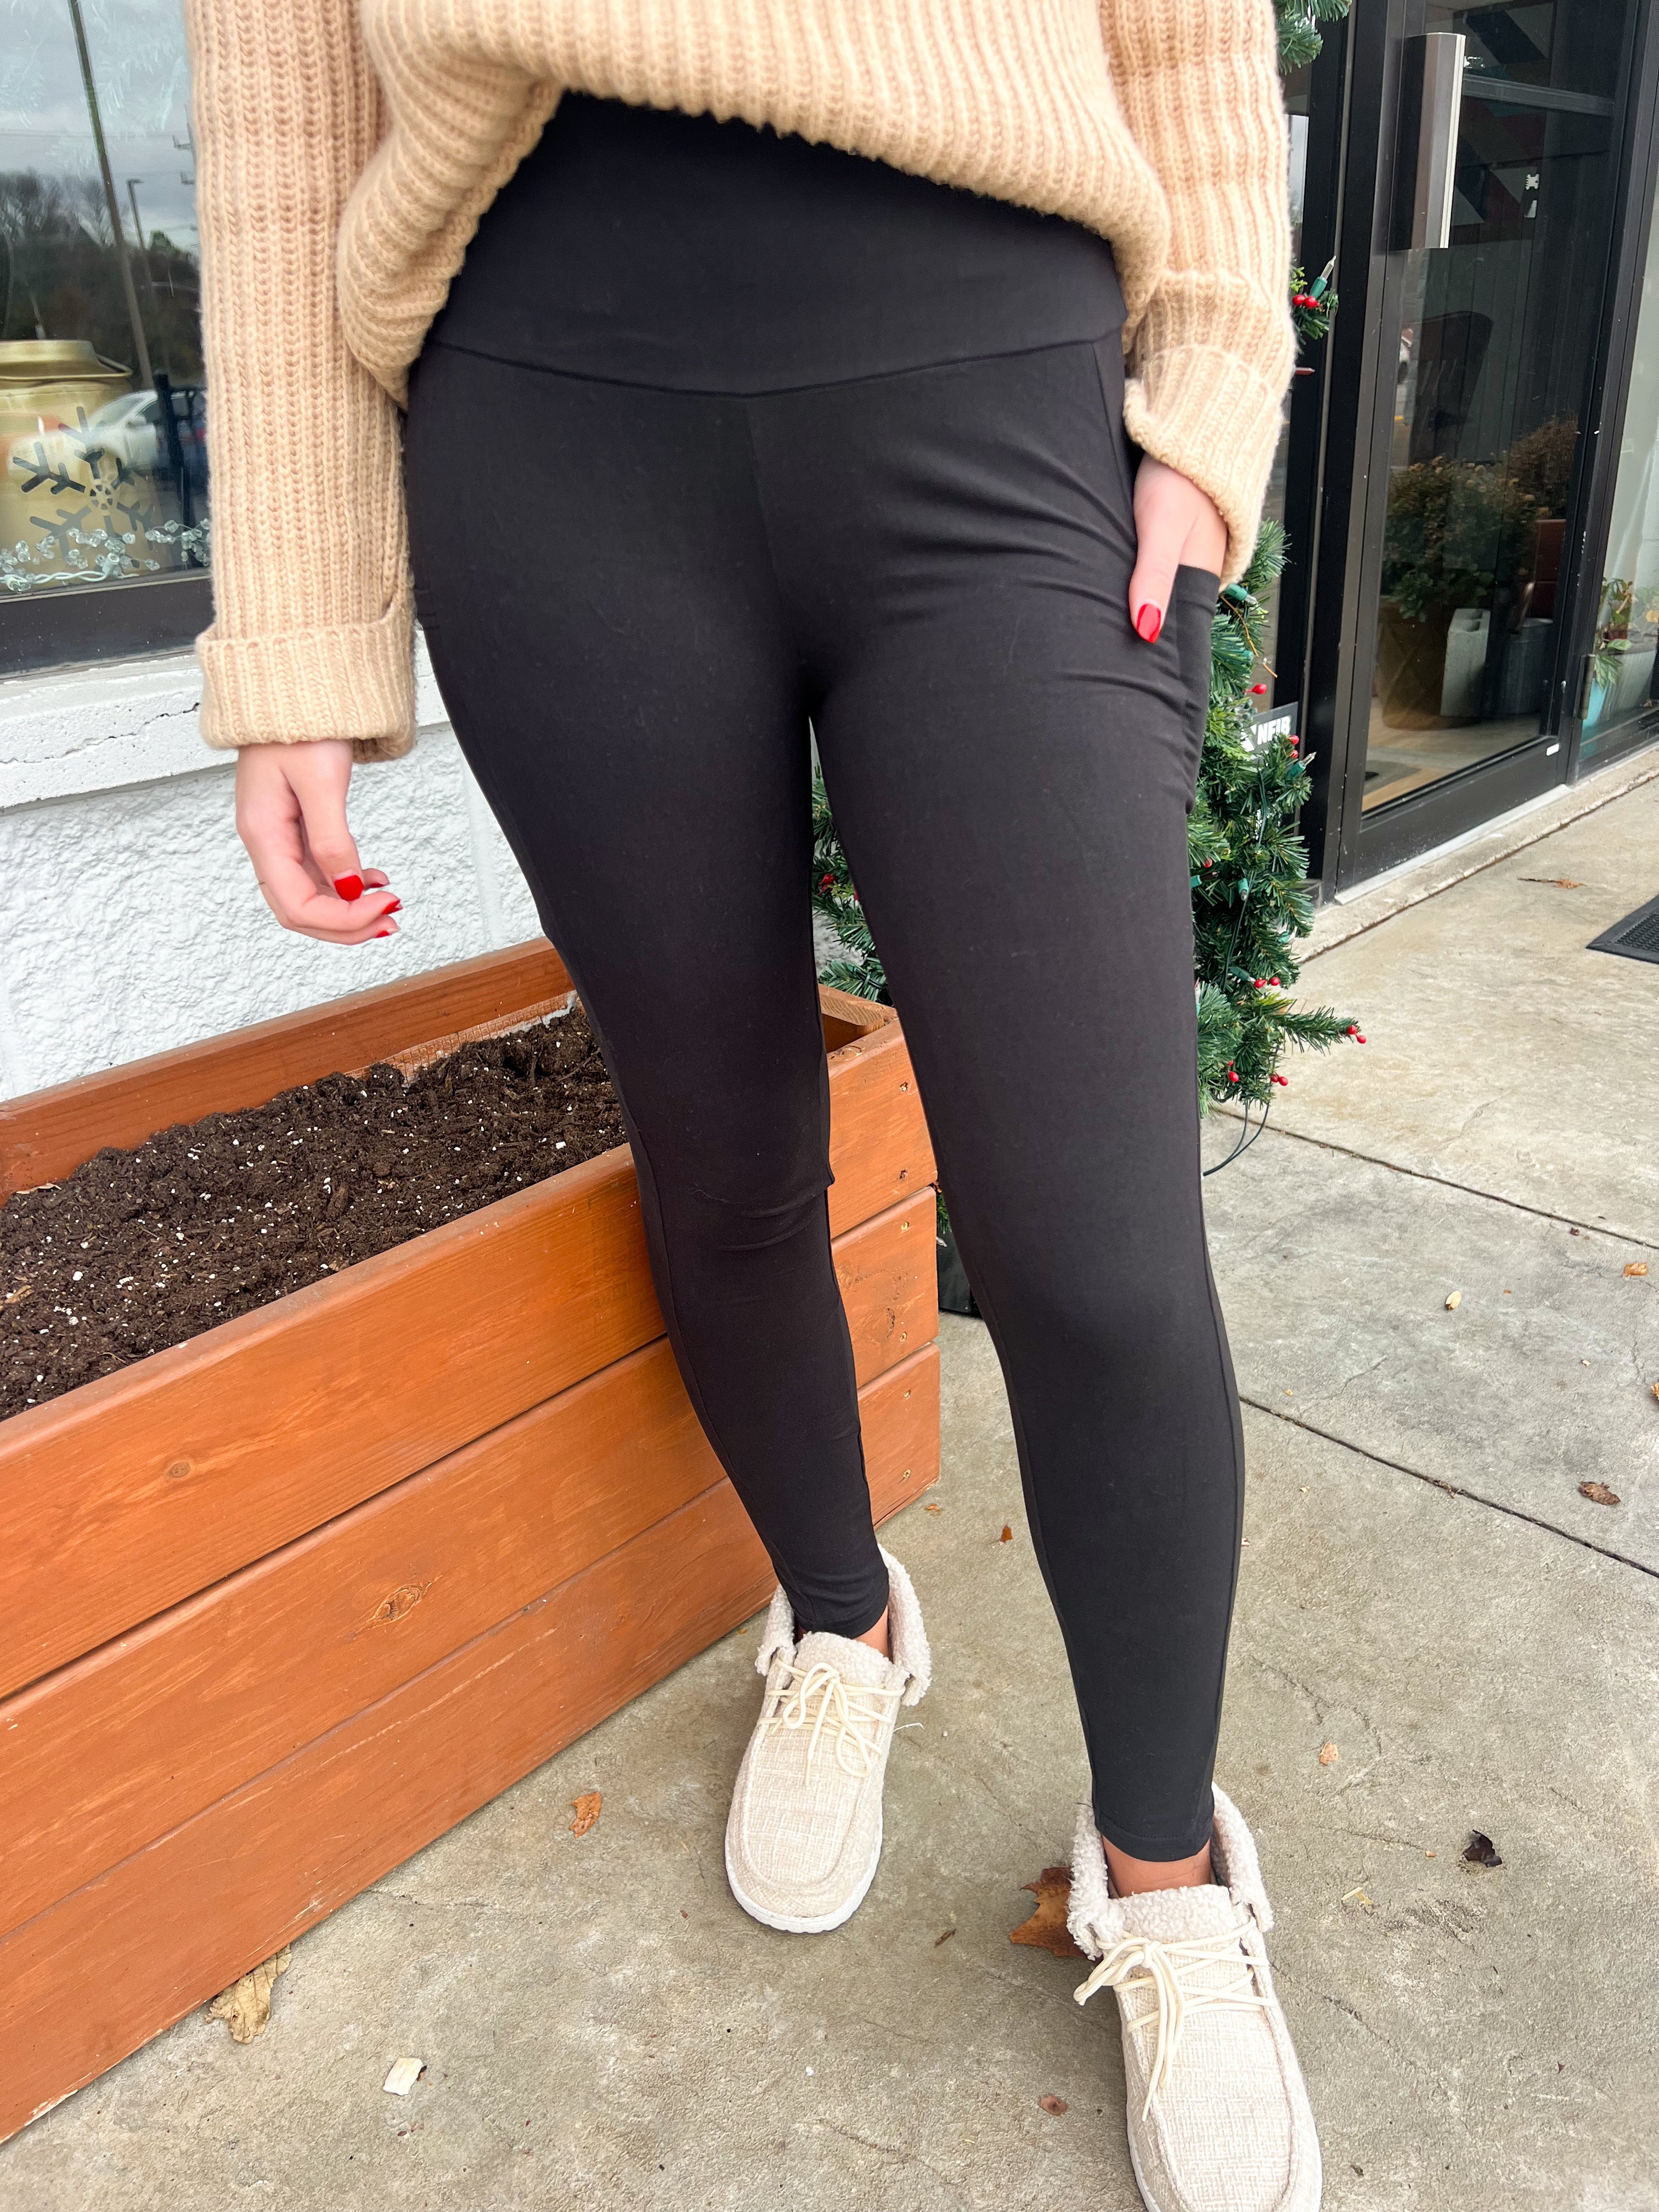 Living In These Pocket Leggings 3.0-Leggings-The Lovely Closet-The Lovely Closet, Women's Fashion Boutique in Alexandria, KY